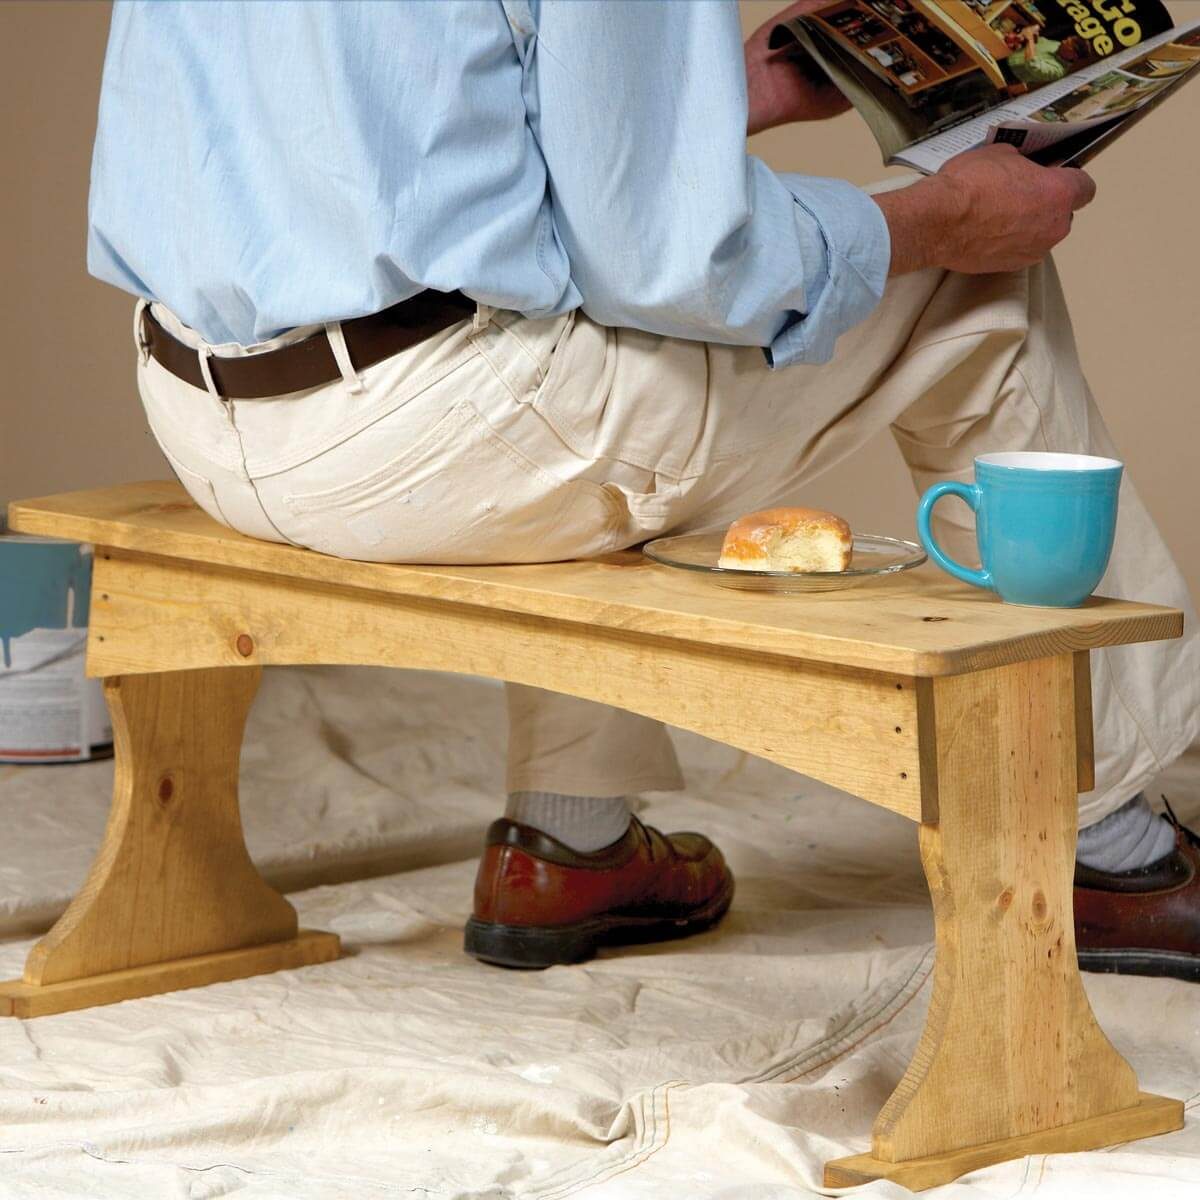 15 Awesome Woodworking Projects To Try The Family Handyman